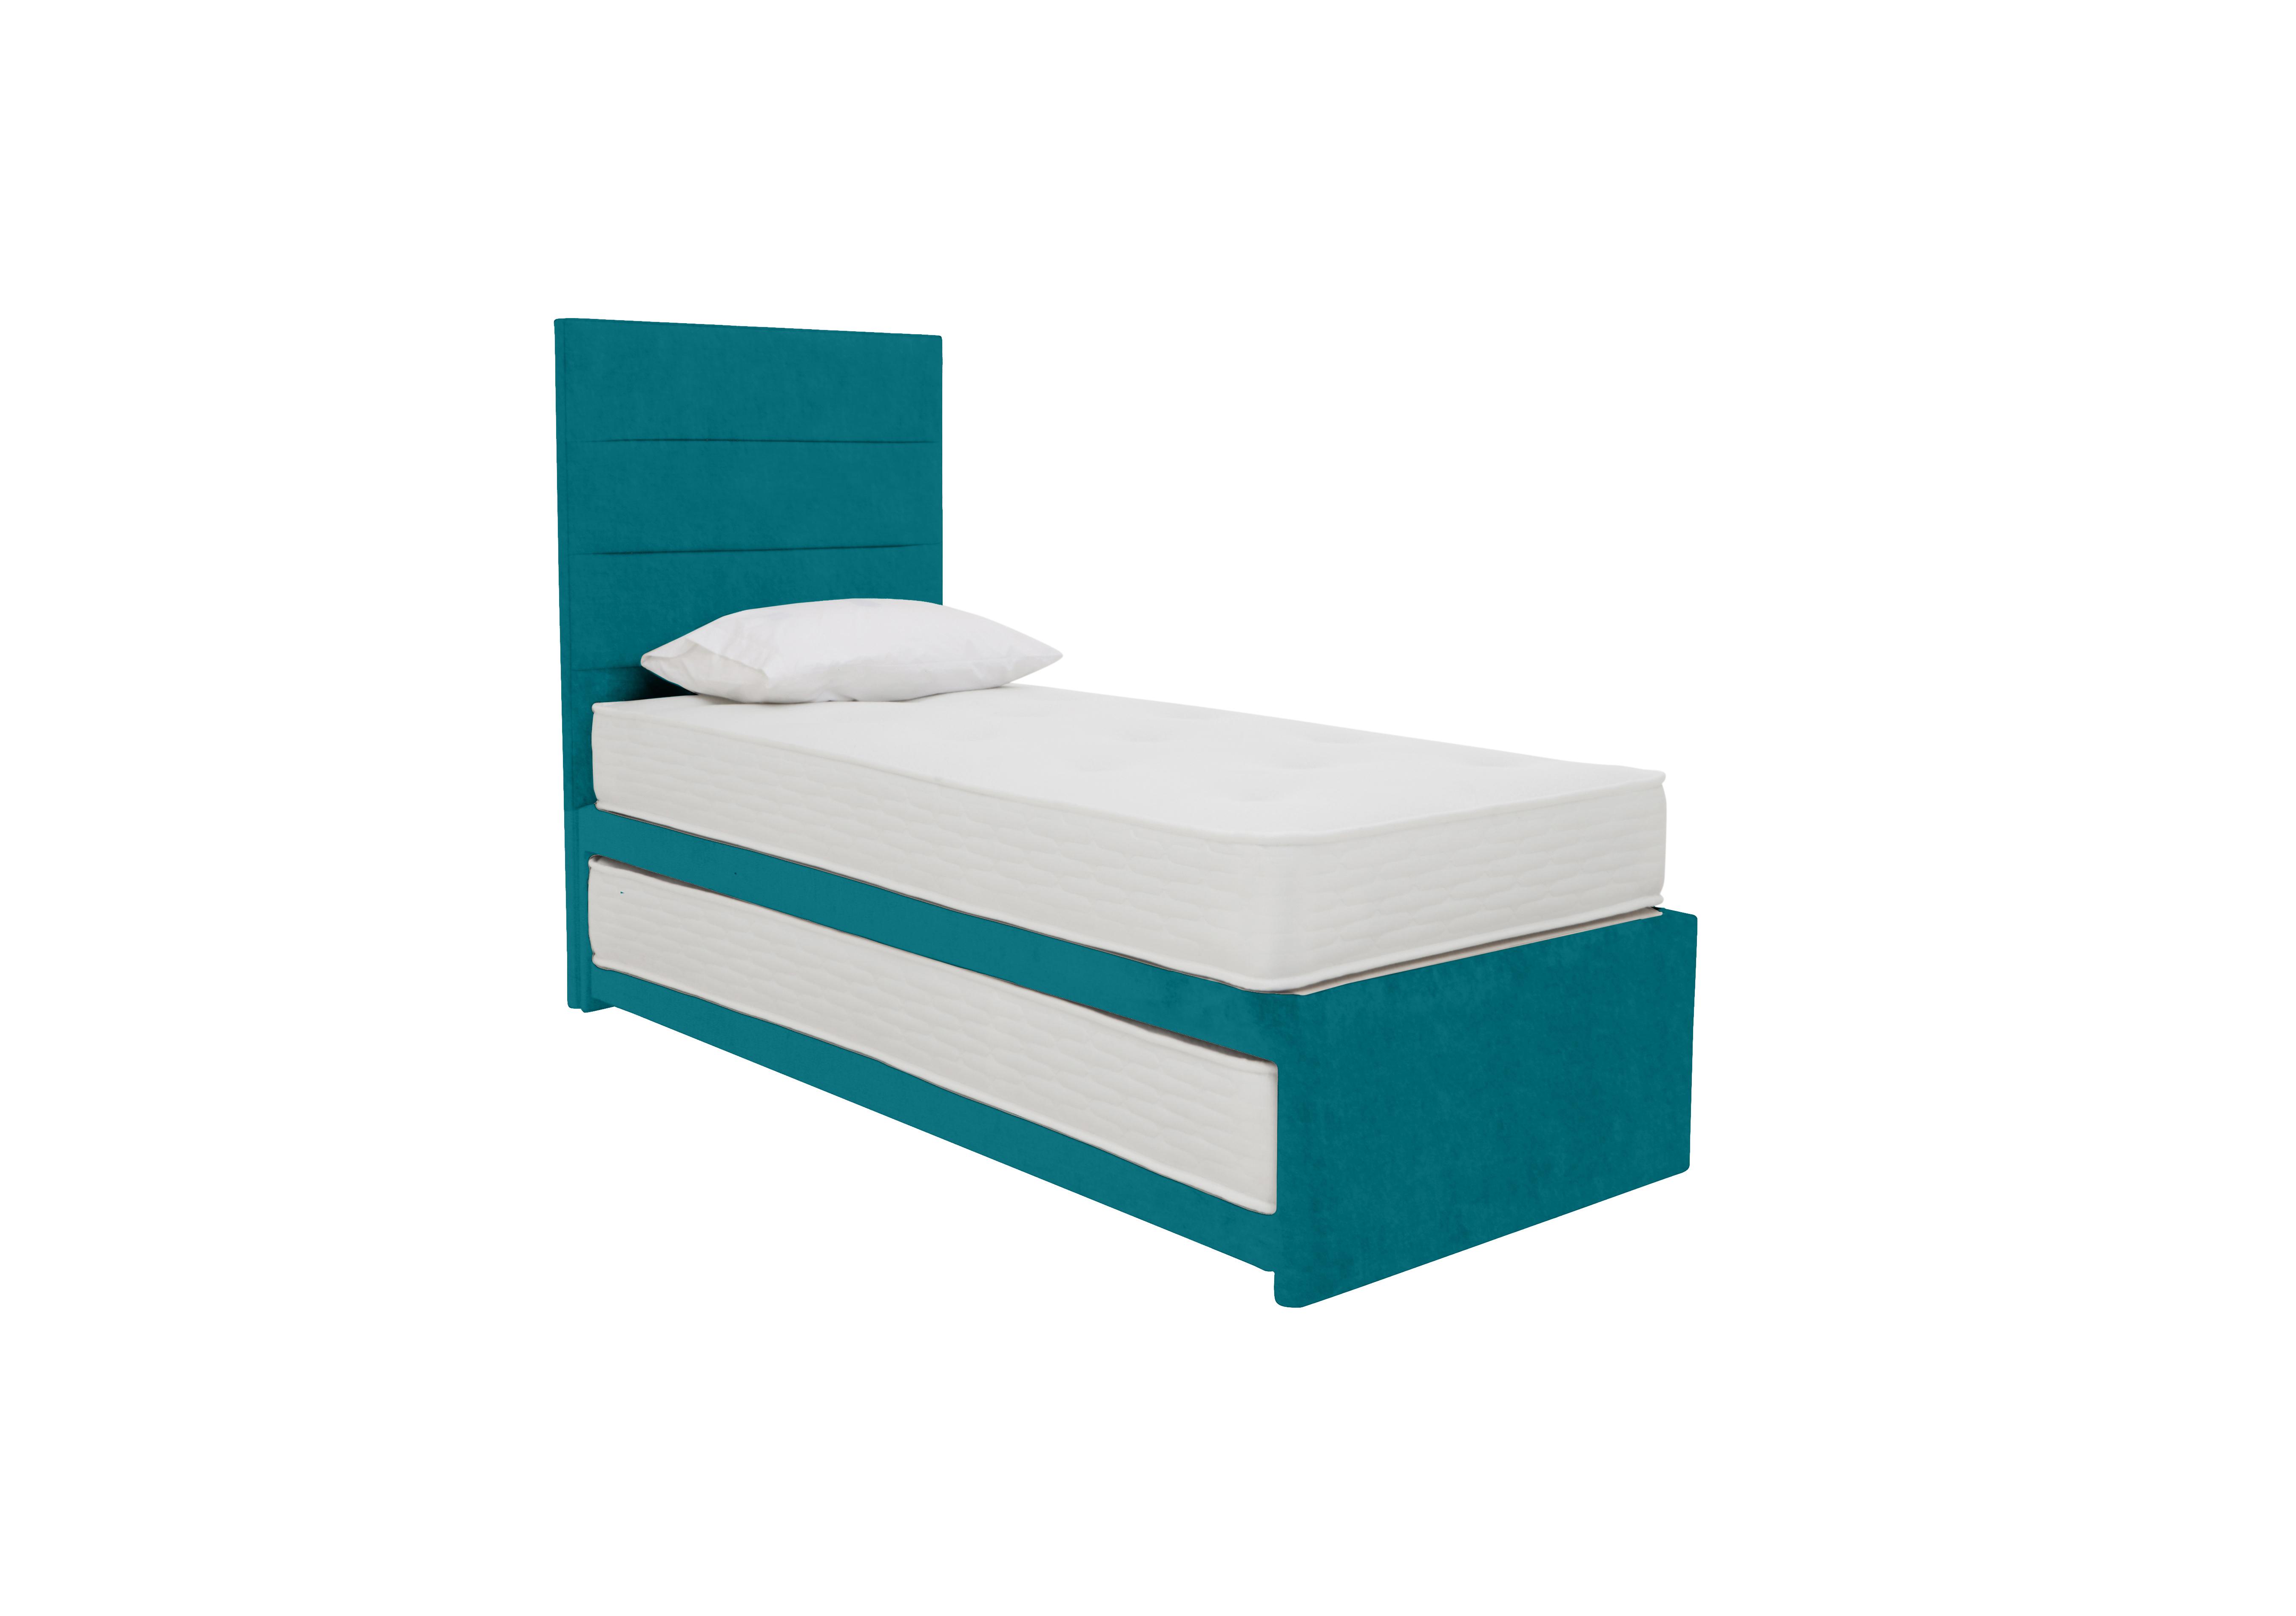 Guest Bed with Coil Mattress and Pocket Sprung Mattress in Plush Atlantic on Furniture Village